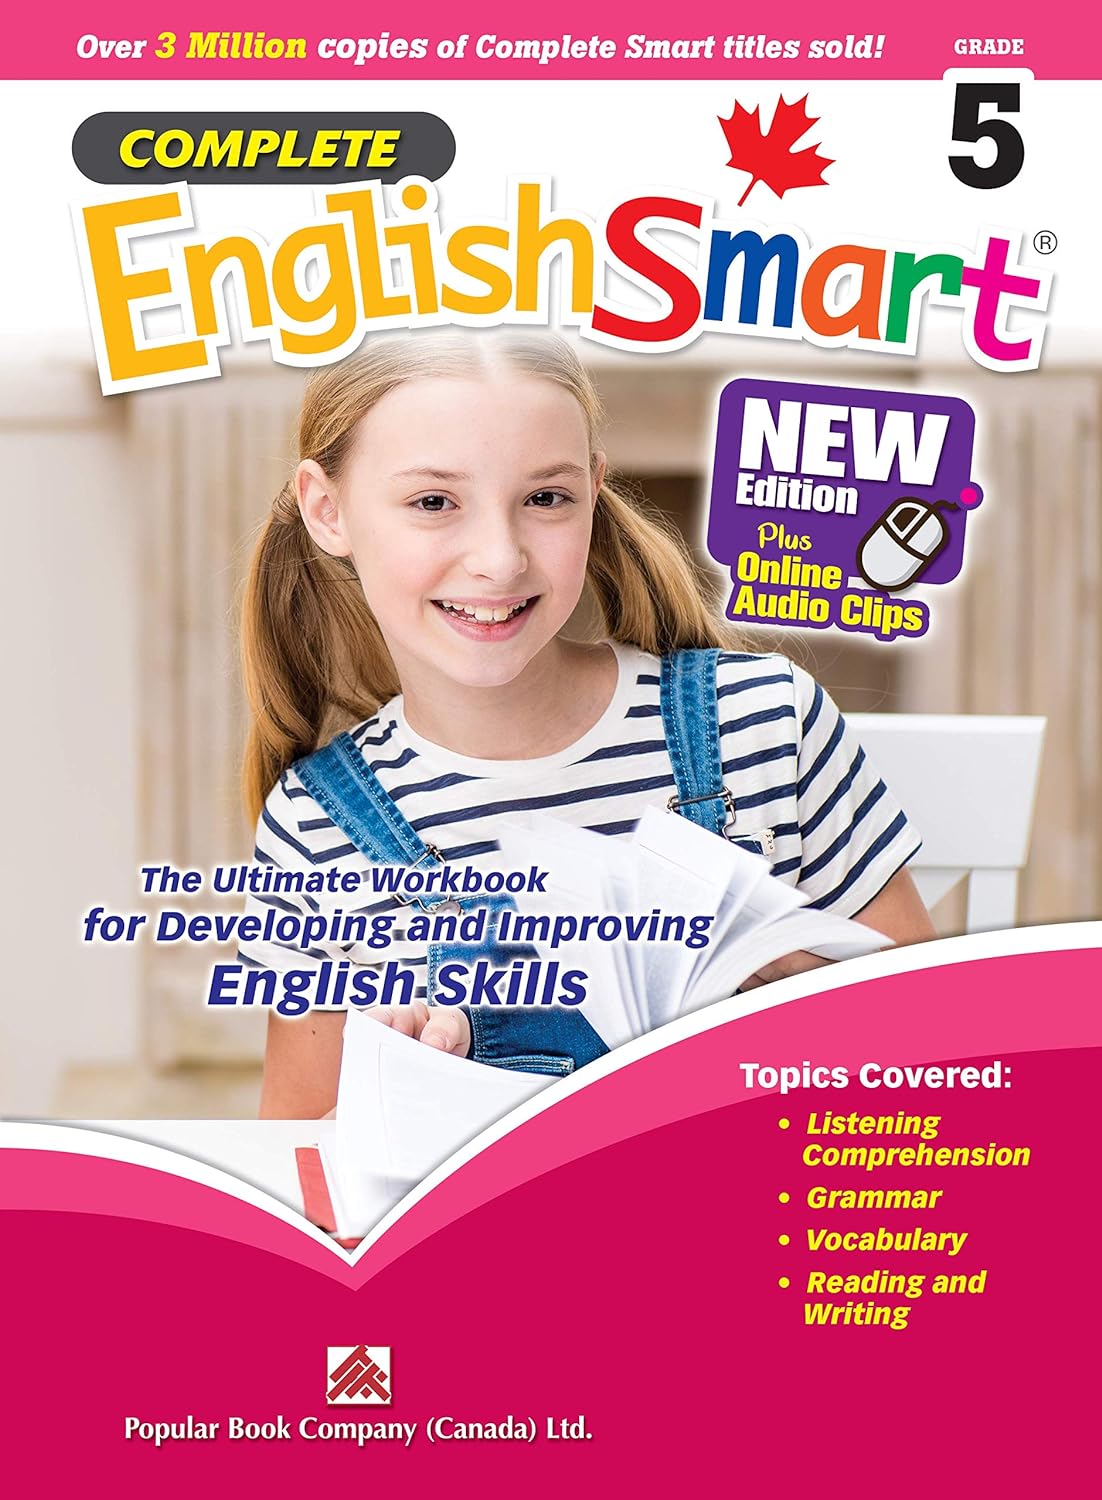 Complete English Smart : Grade 5 (New Edition) Canadian Curriculum English Workbook